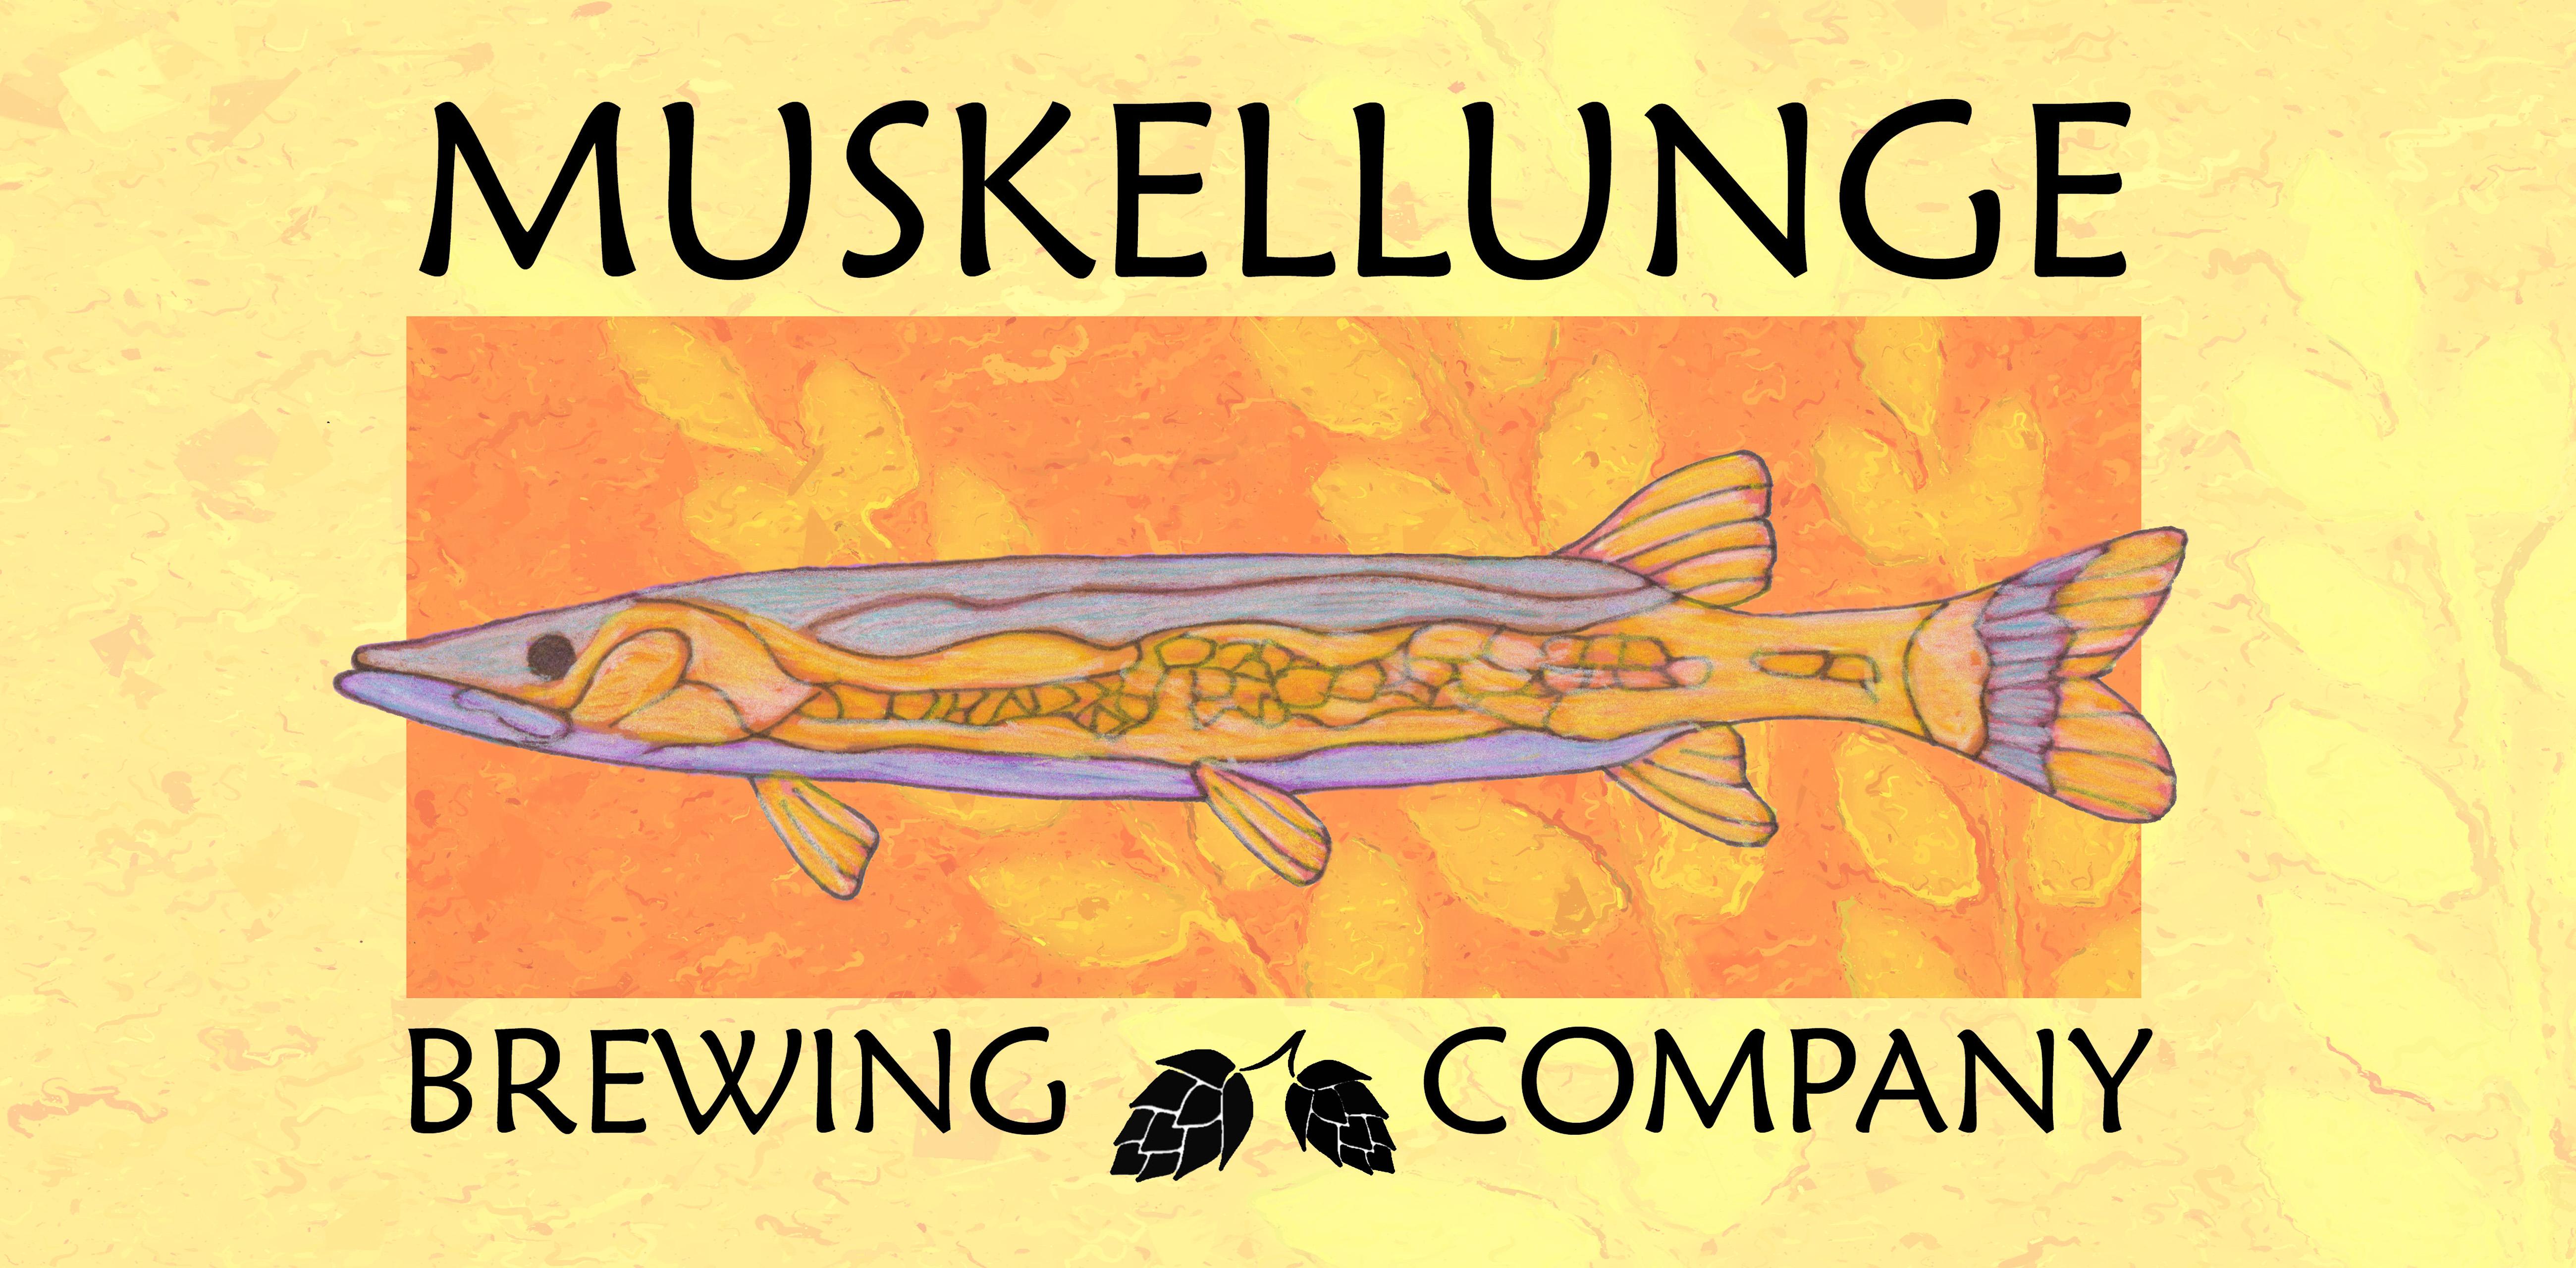 Muskellunge Brewing Company